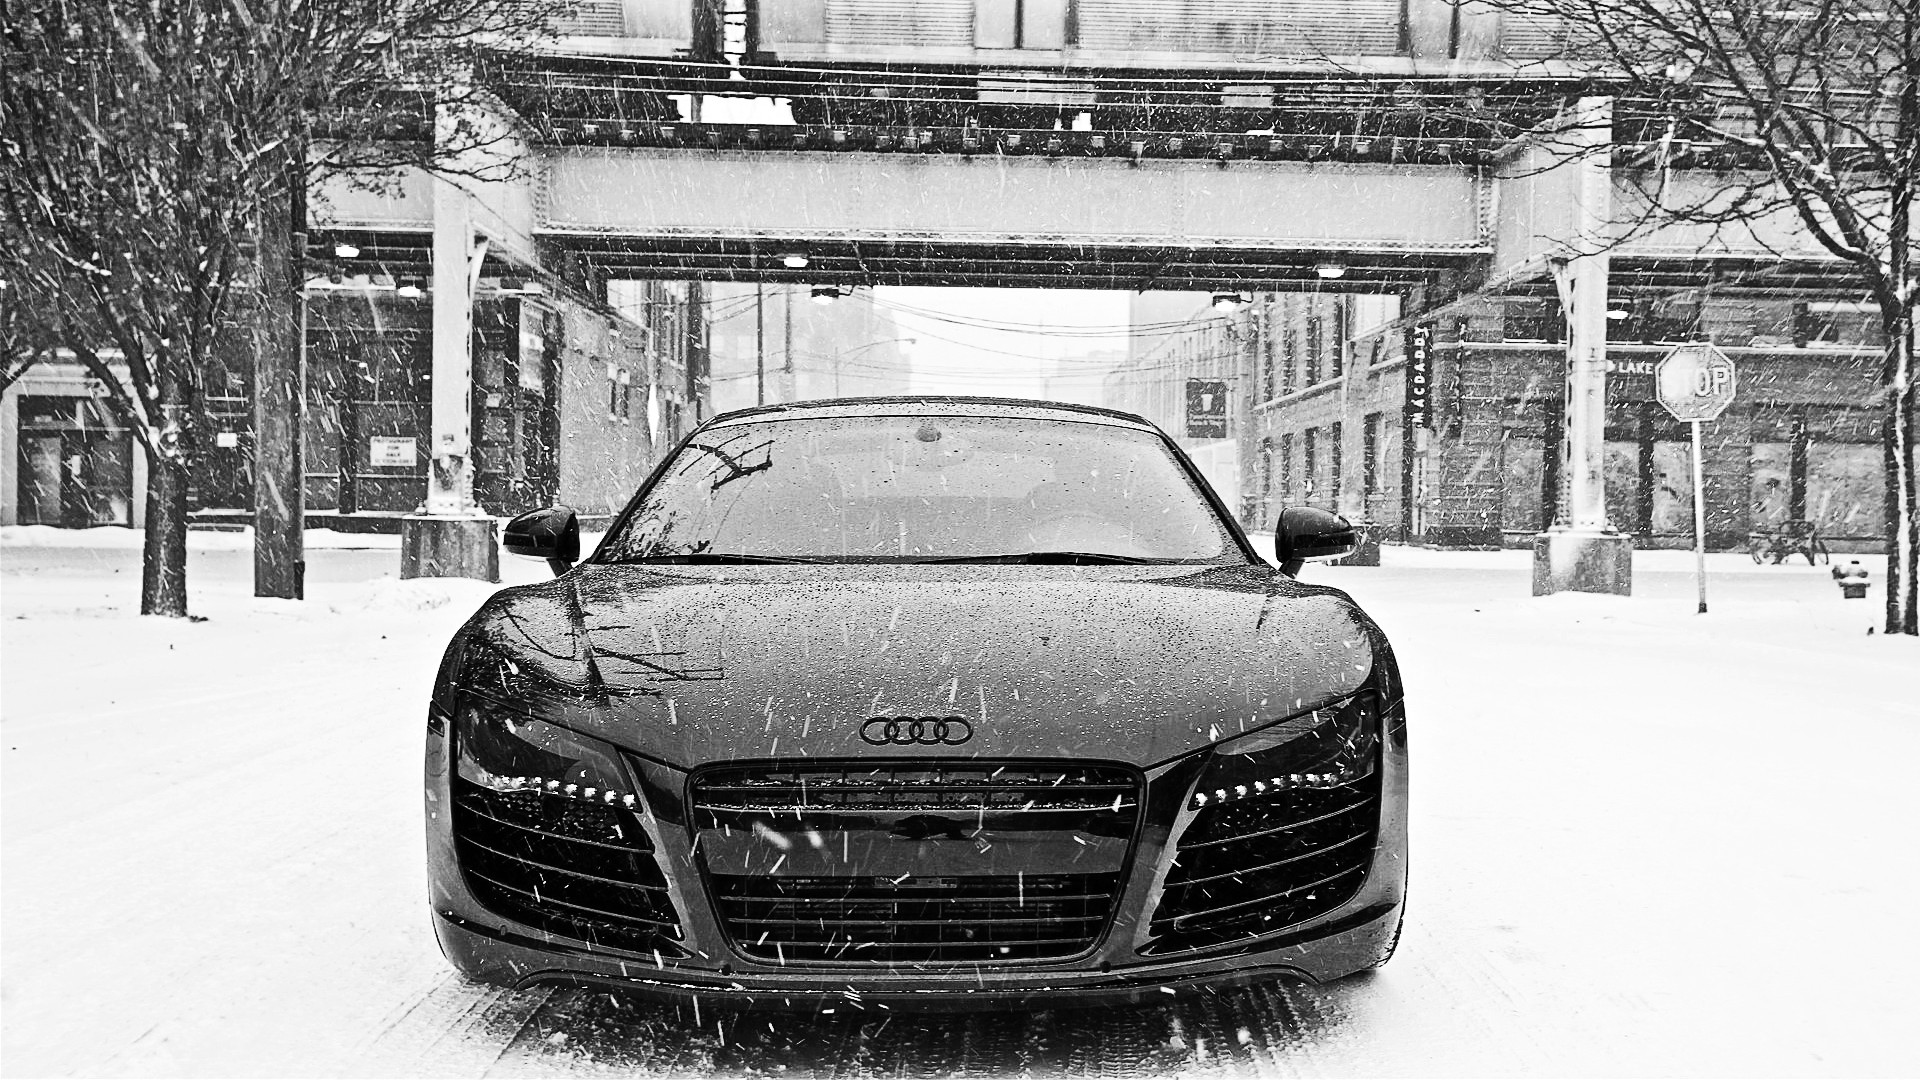 Audi R8 in Snow Wallpapers HD Wallpapers